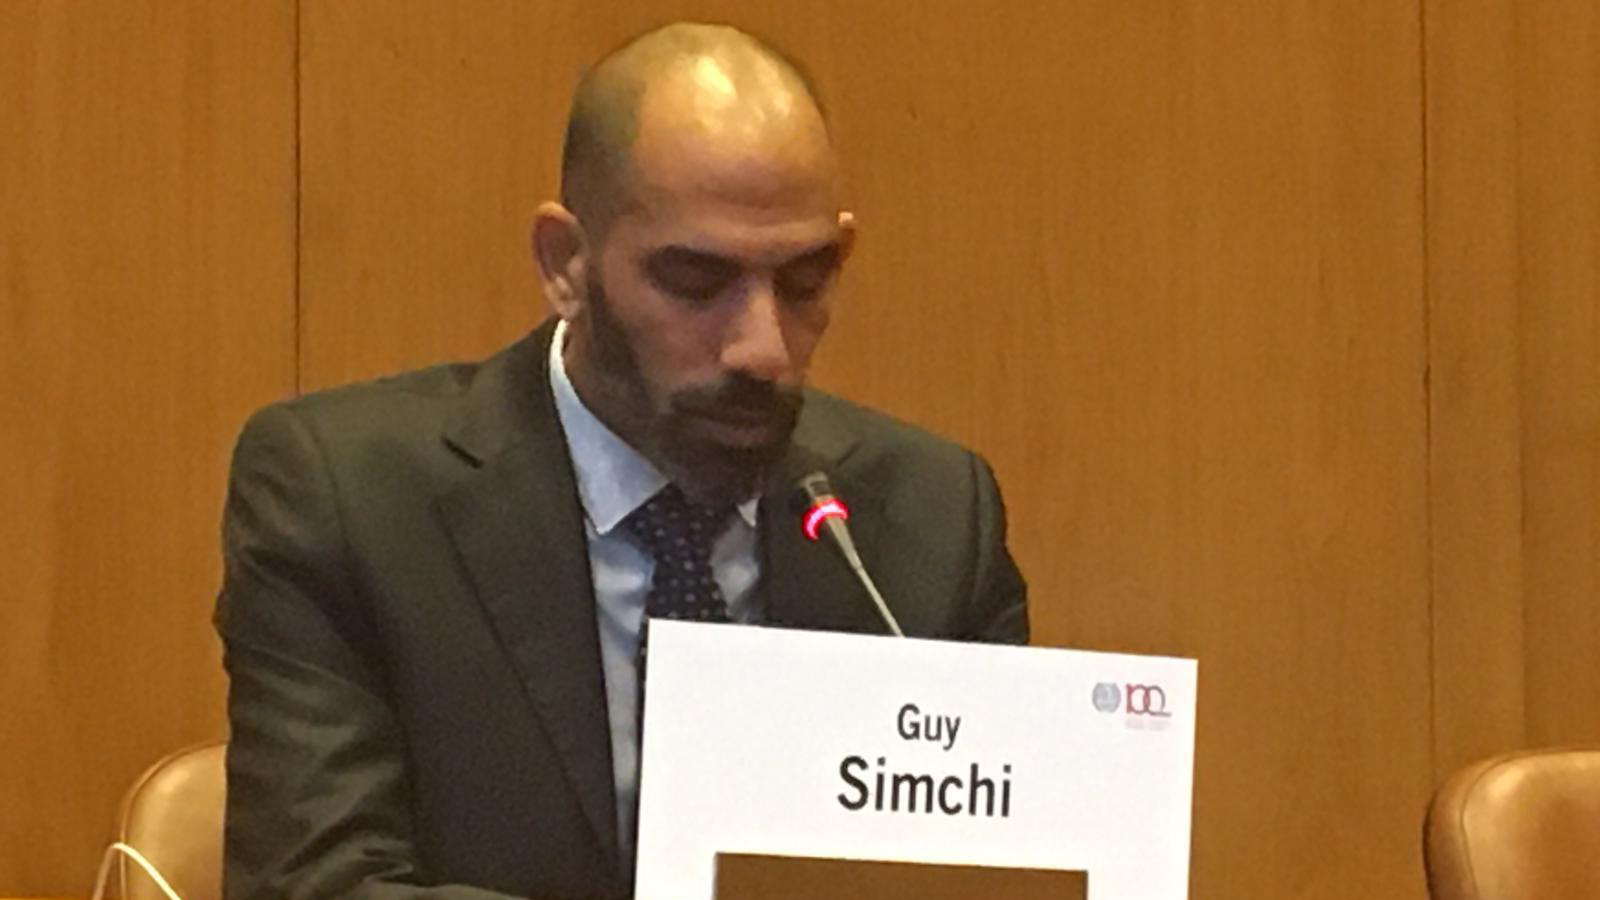 Guy Simchi gives a speech at the International Labor Organization Conference for the Future of Work, November 2019 (Photograph: the Histadrut)